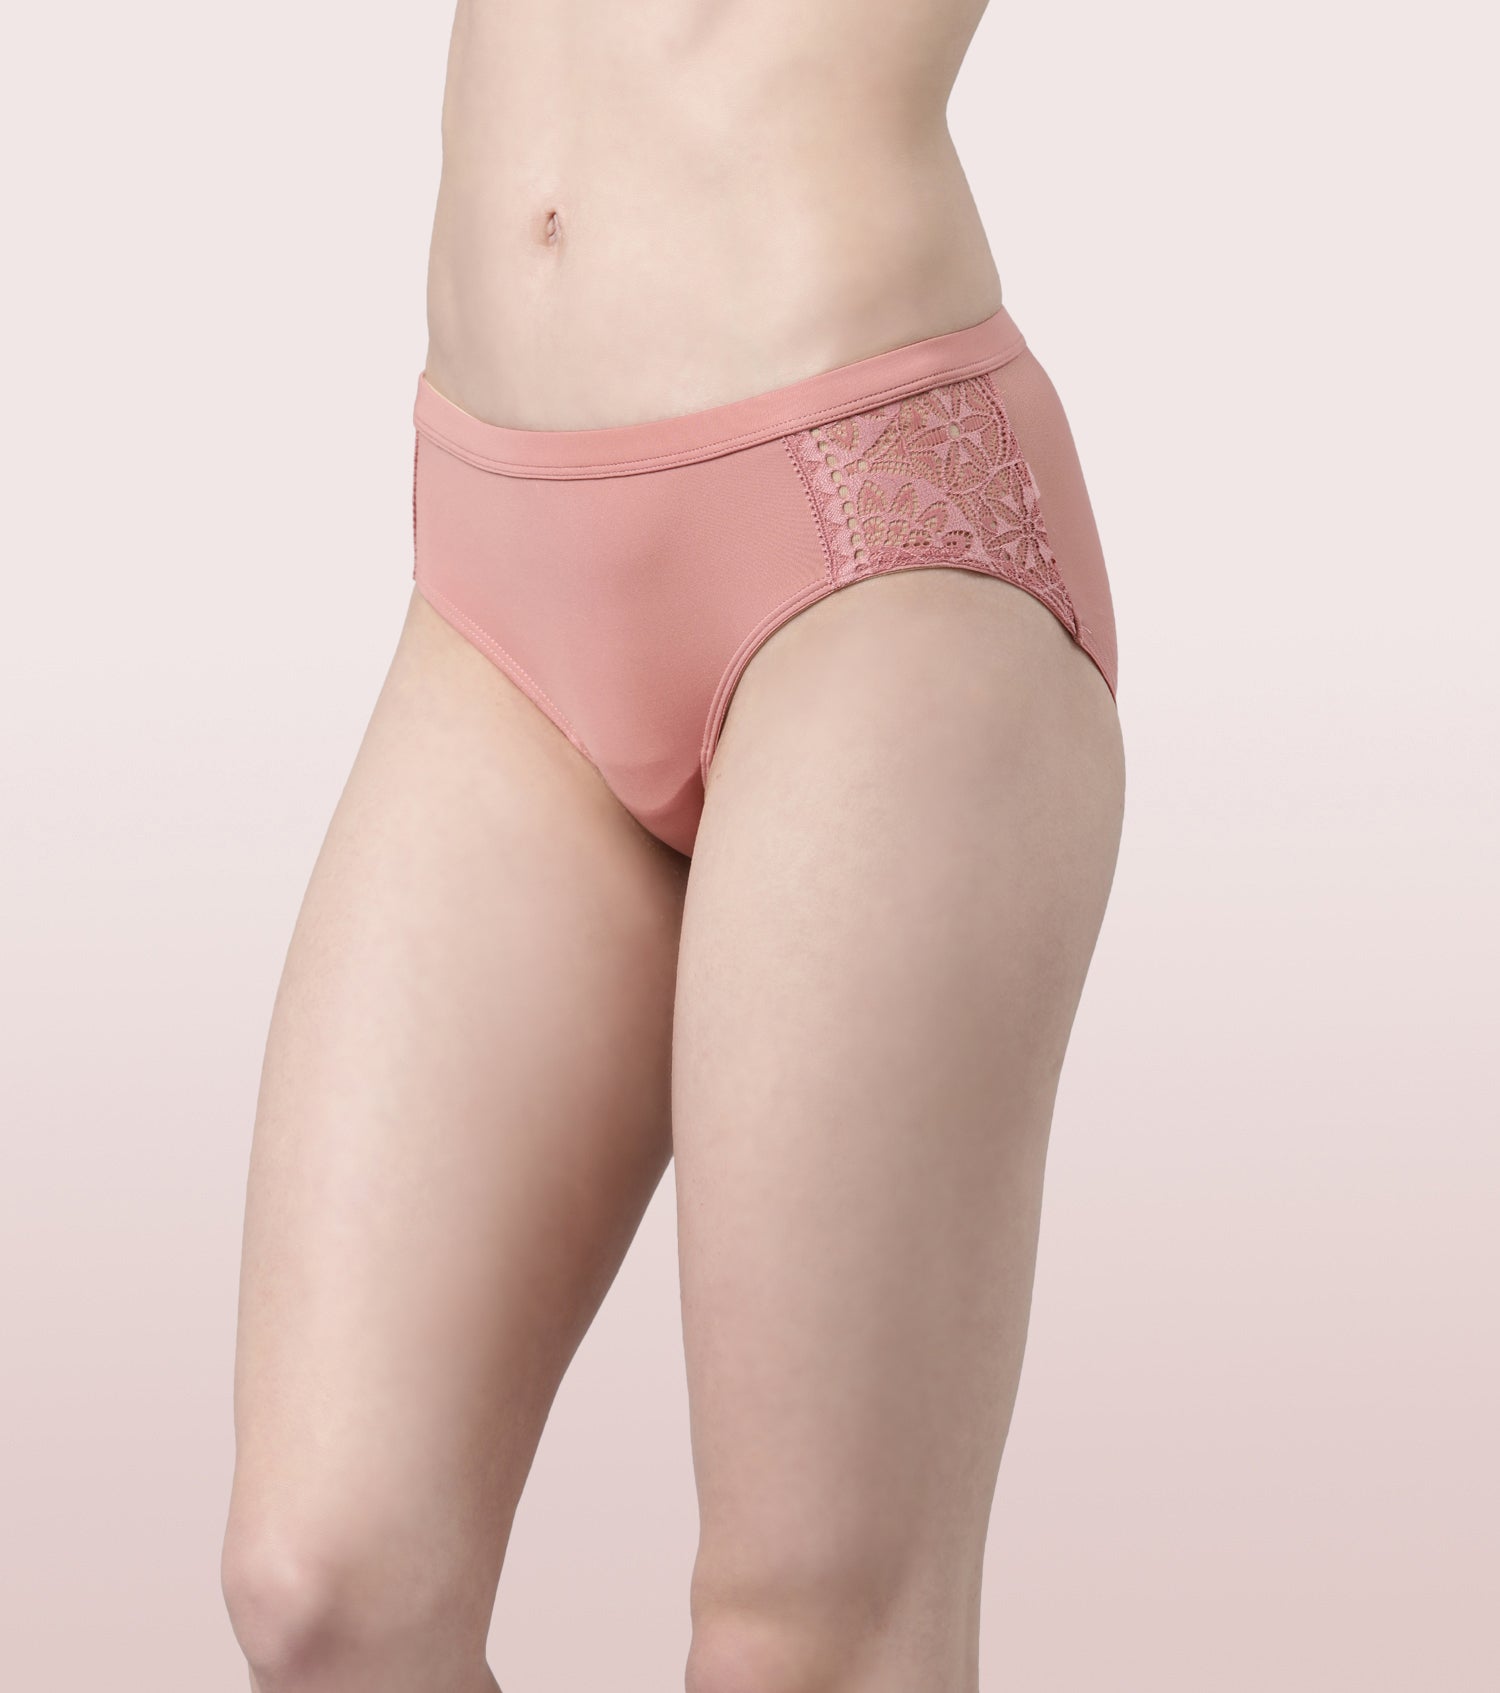 Low Rise All-Over Pink Floral Lace With Bow & Black Trim Thong - Knickers